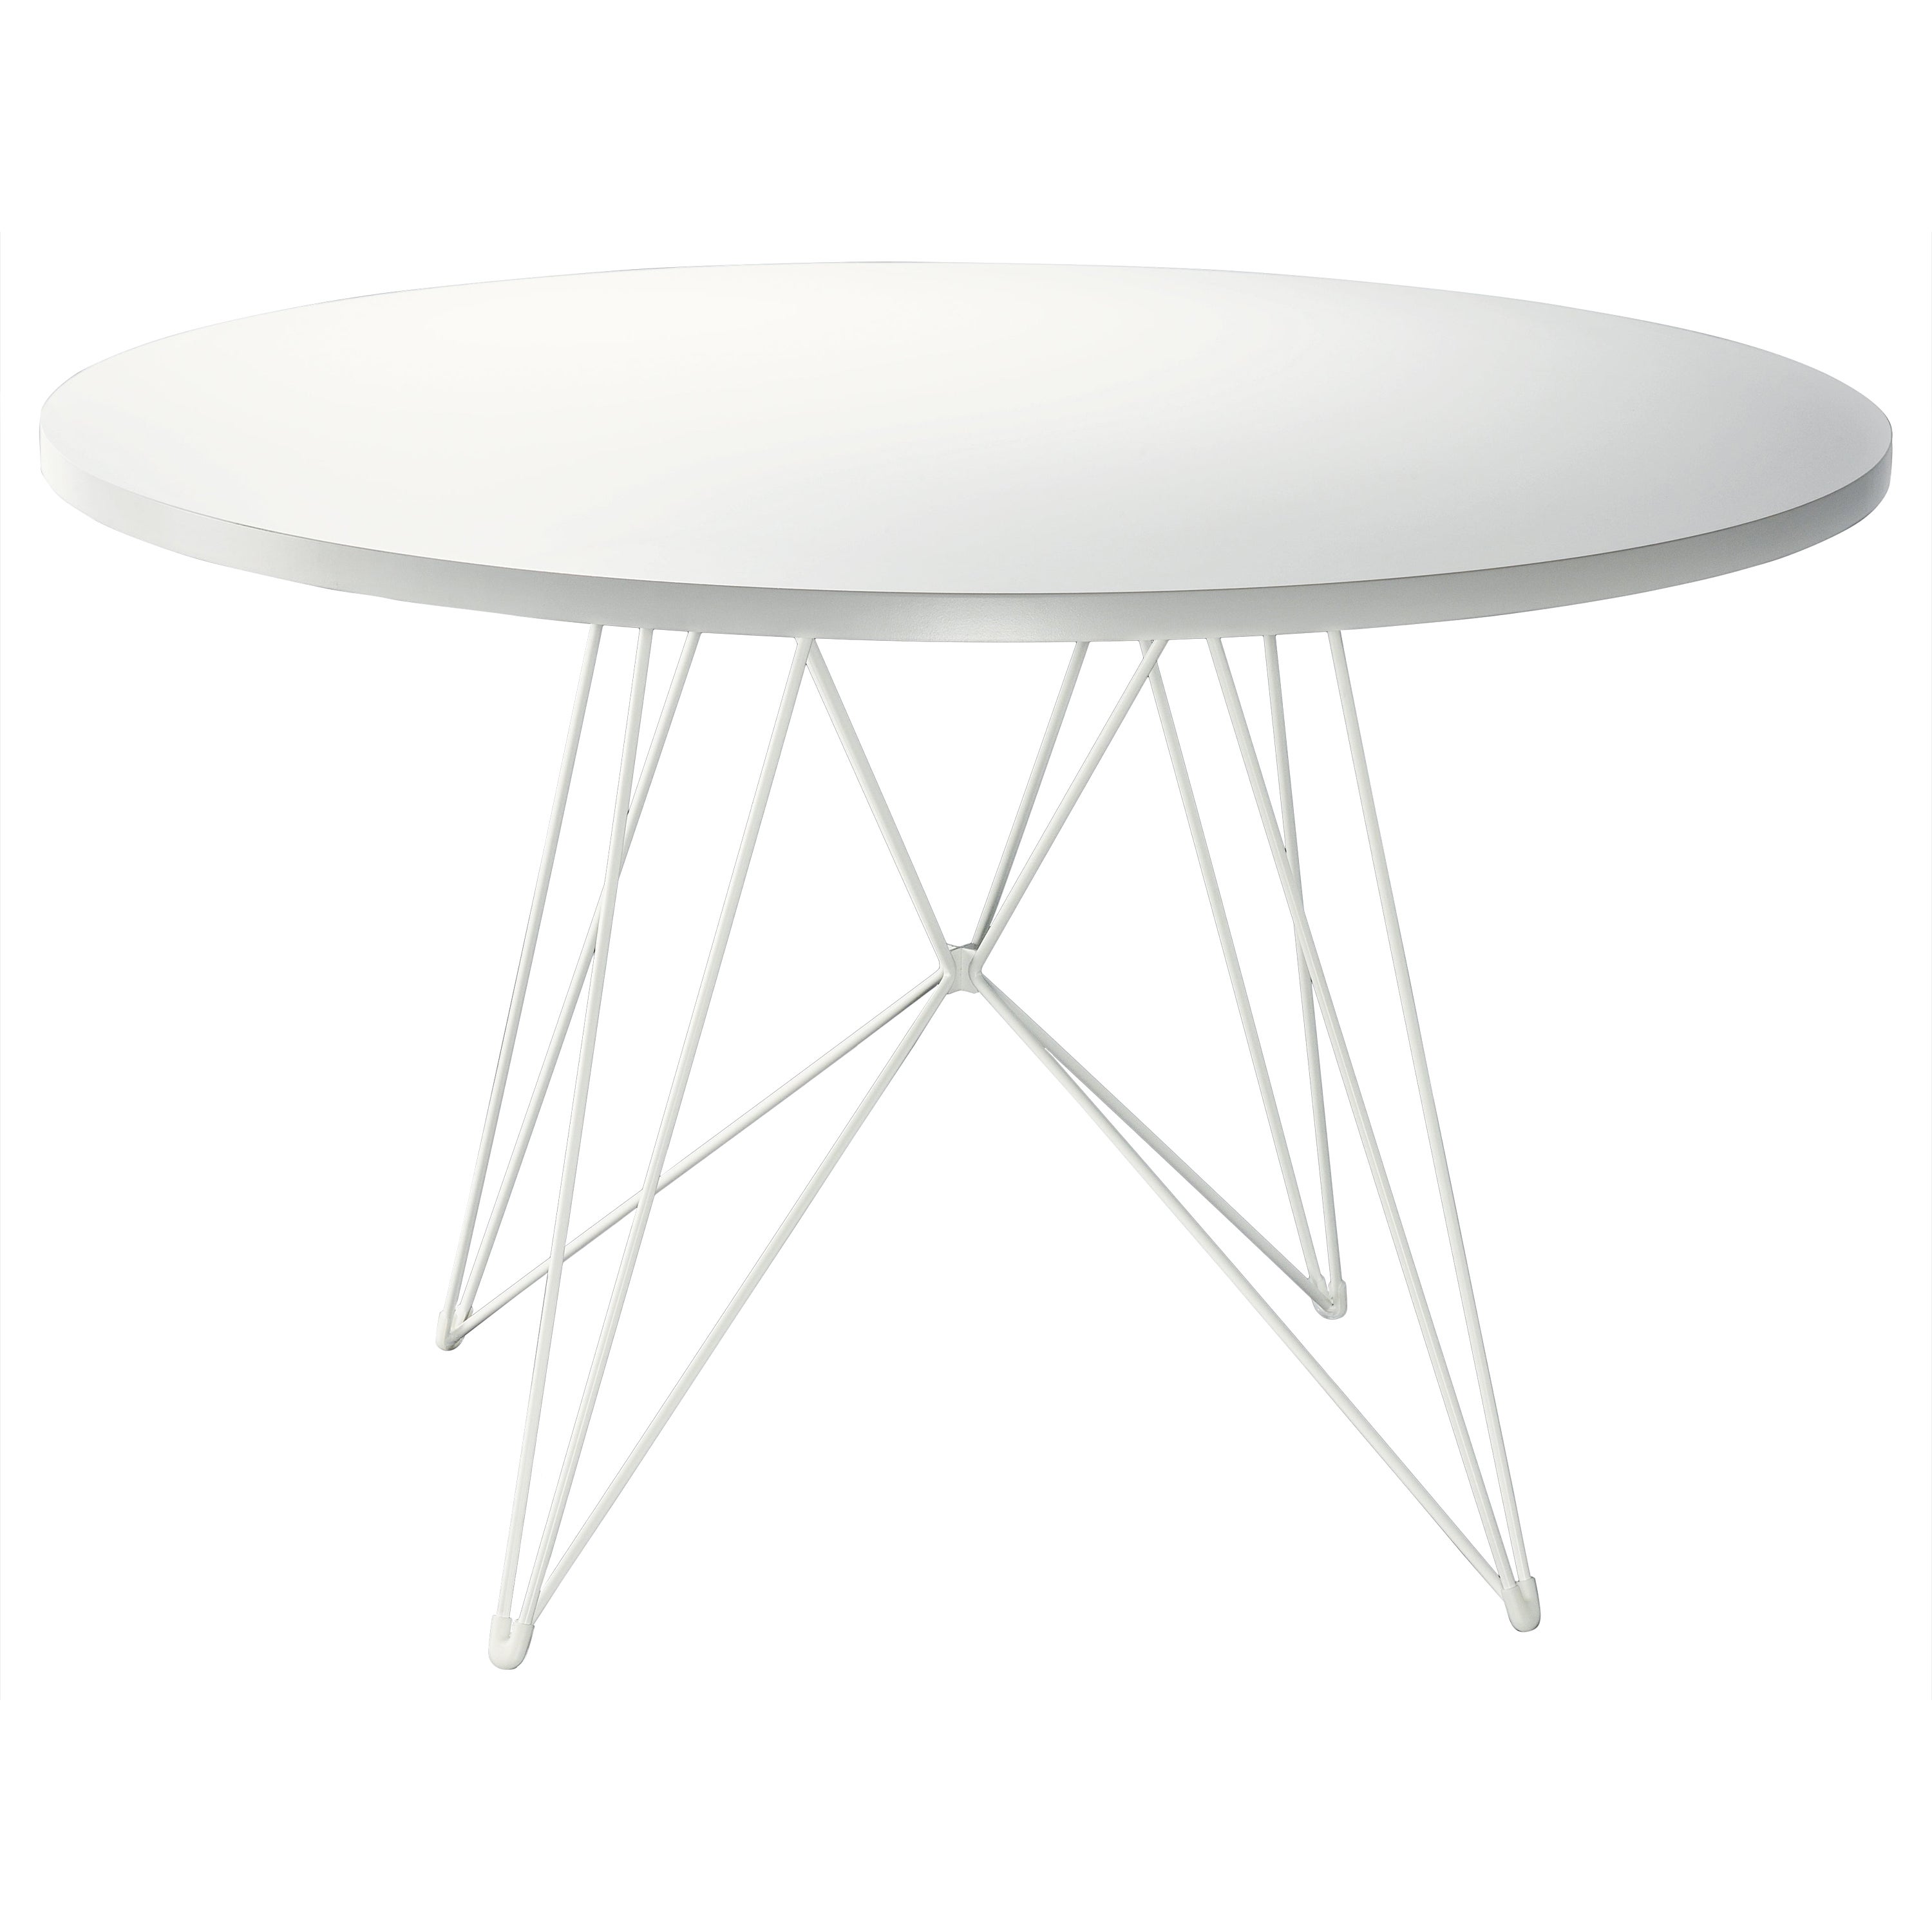 Developed by Magis in 1990, and redesigned in 2003, XZ3 is a table featuring a chromed or epoxy painted steel rod structure with an architectural style reminis- cent of a slender pylon, a graphic convergence of lines, on which sits a rectan- gular,